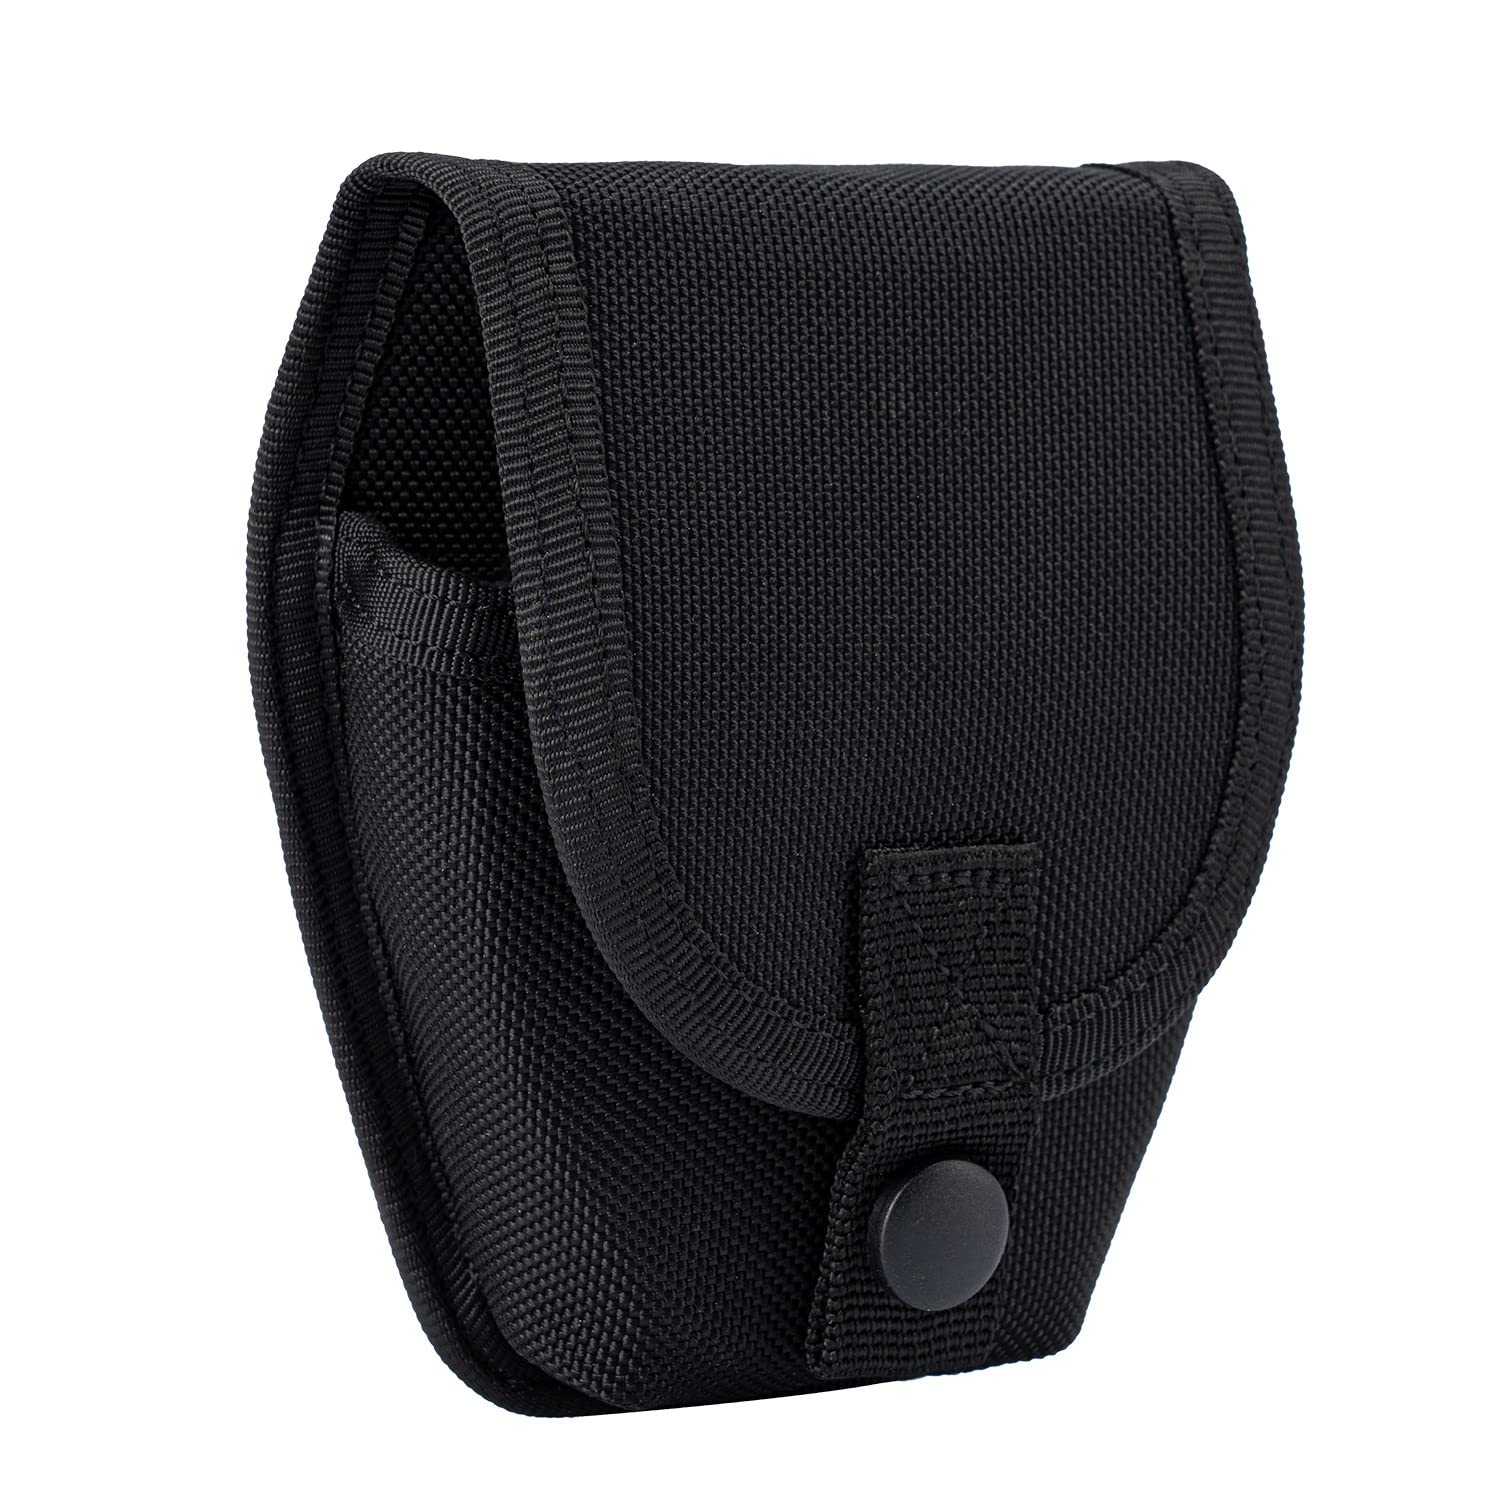 Standard Handcuff Holder Holster Enforcement Nylon Covered Handcuff Case  Pouch